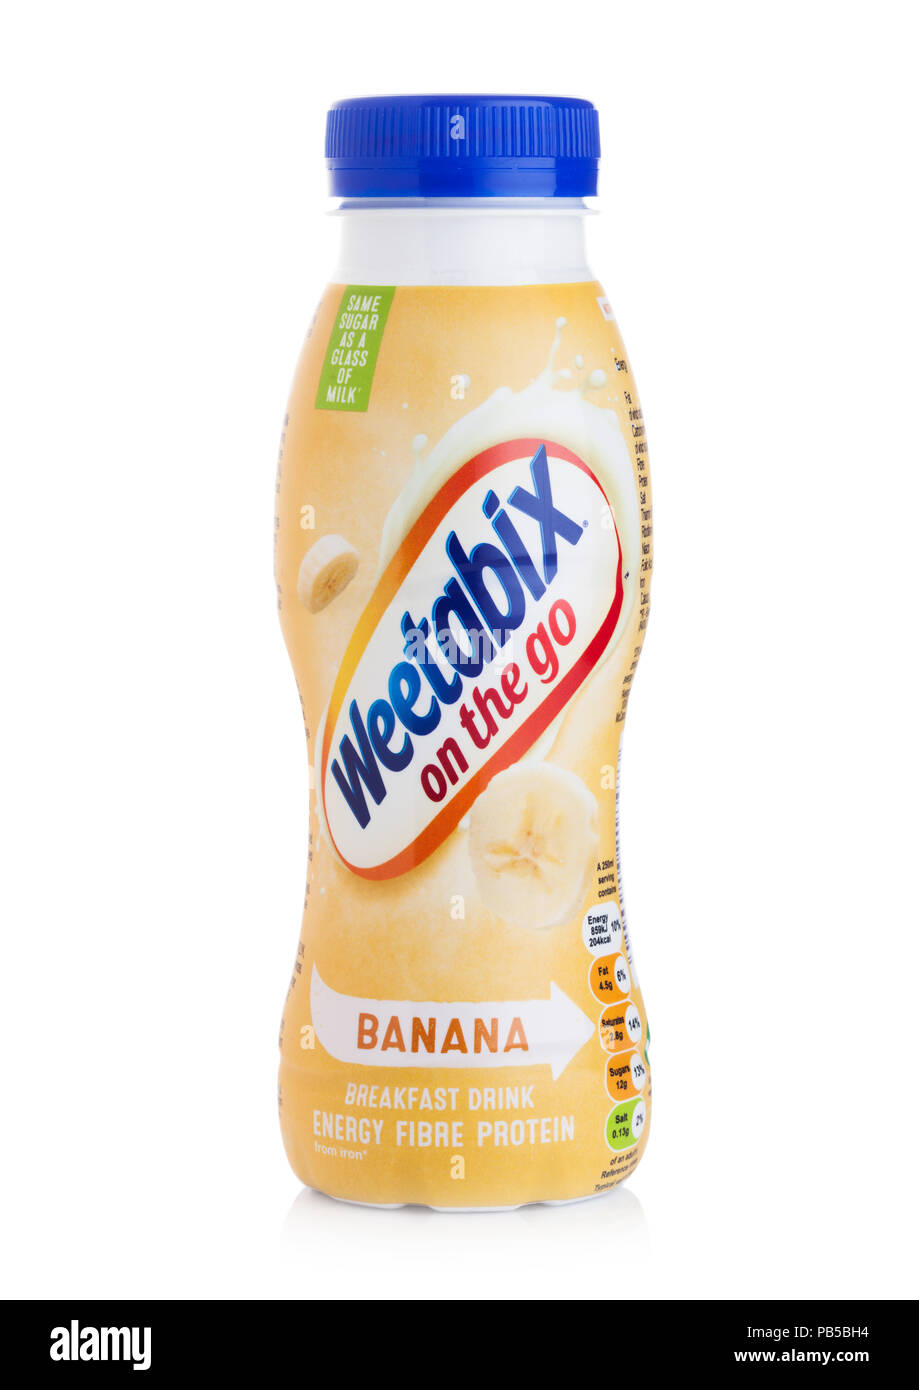 LONDON, UK - JULY 29, 2018: Plastic bottle of Weetabix breakfast drink energy fiber protein with banana flavour on white background. Stock Photo